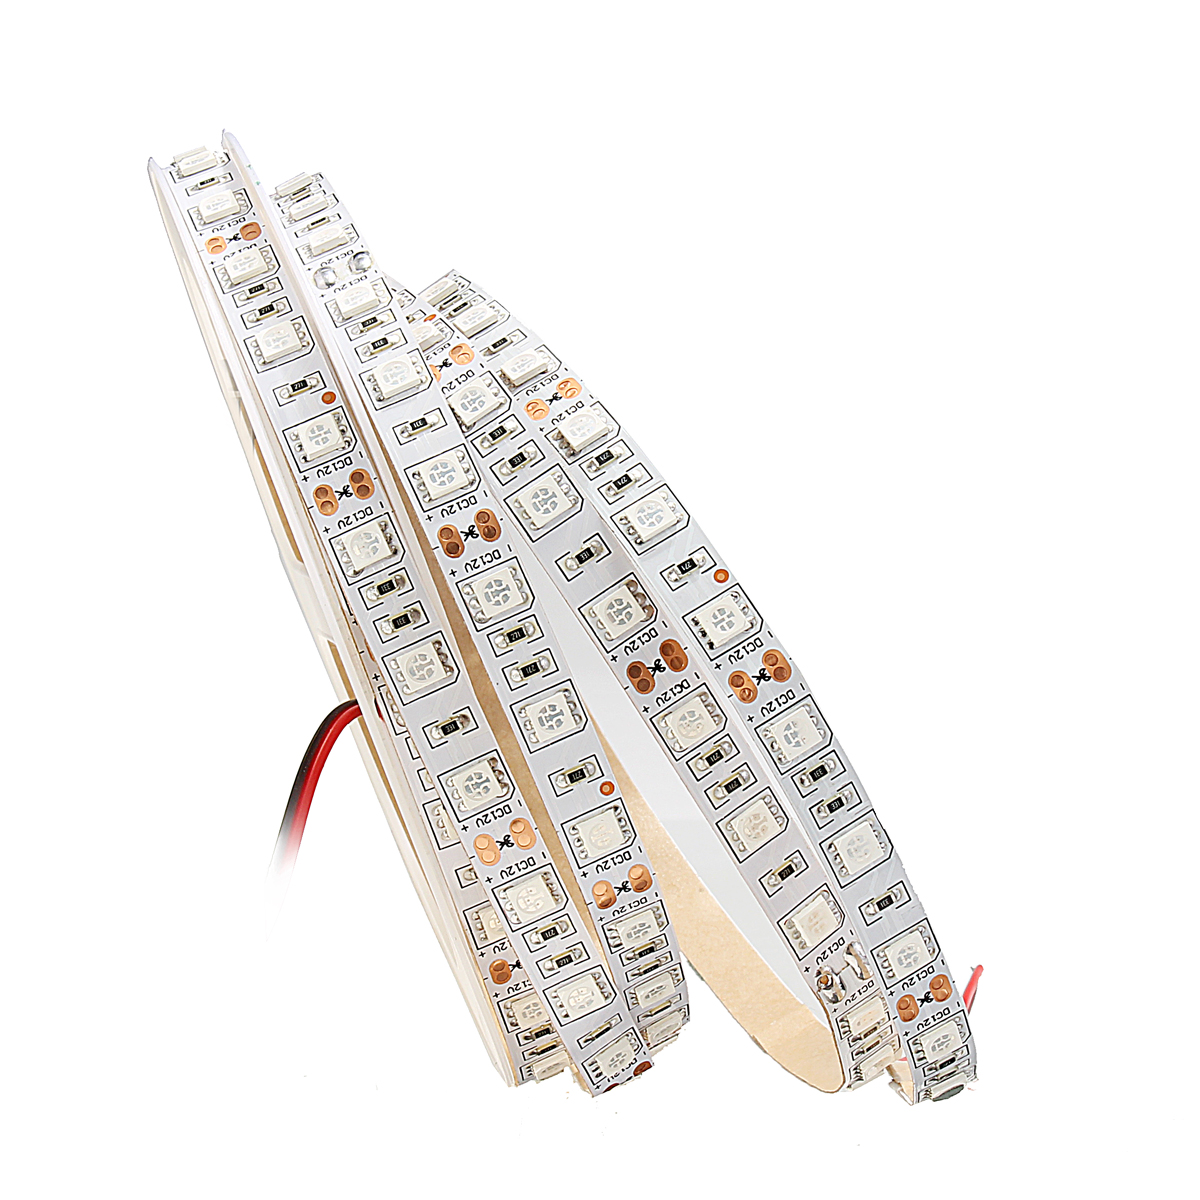 DC12V-5M-Non-waterproof-SMD5050-RB-31-Grow-LED-Strip-Light--5A-Power-Adapter--Female-Connector-1279130-4